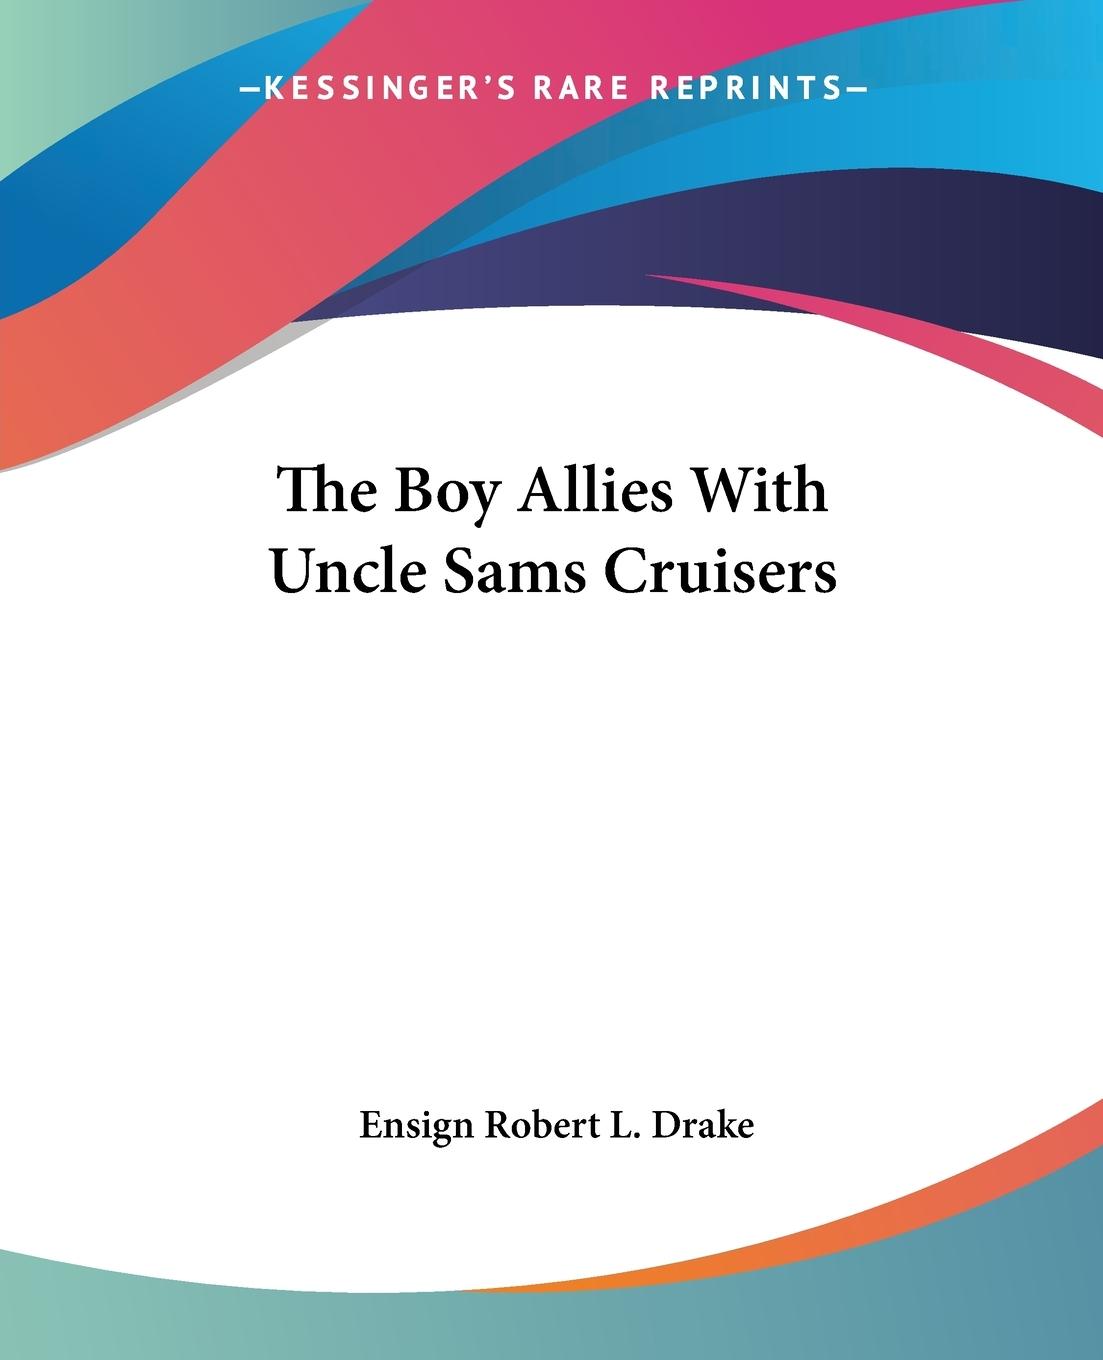 The Boy Allies With Uncle Sams Cruisers - Drake, Ensign Robert L.